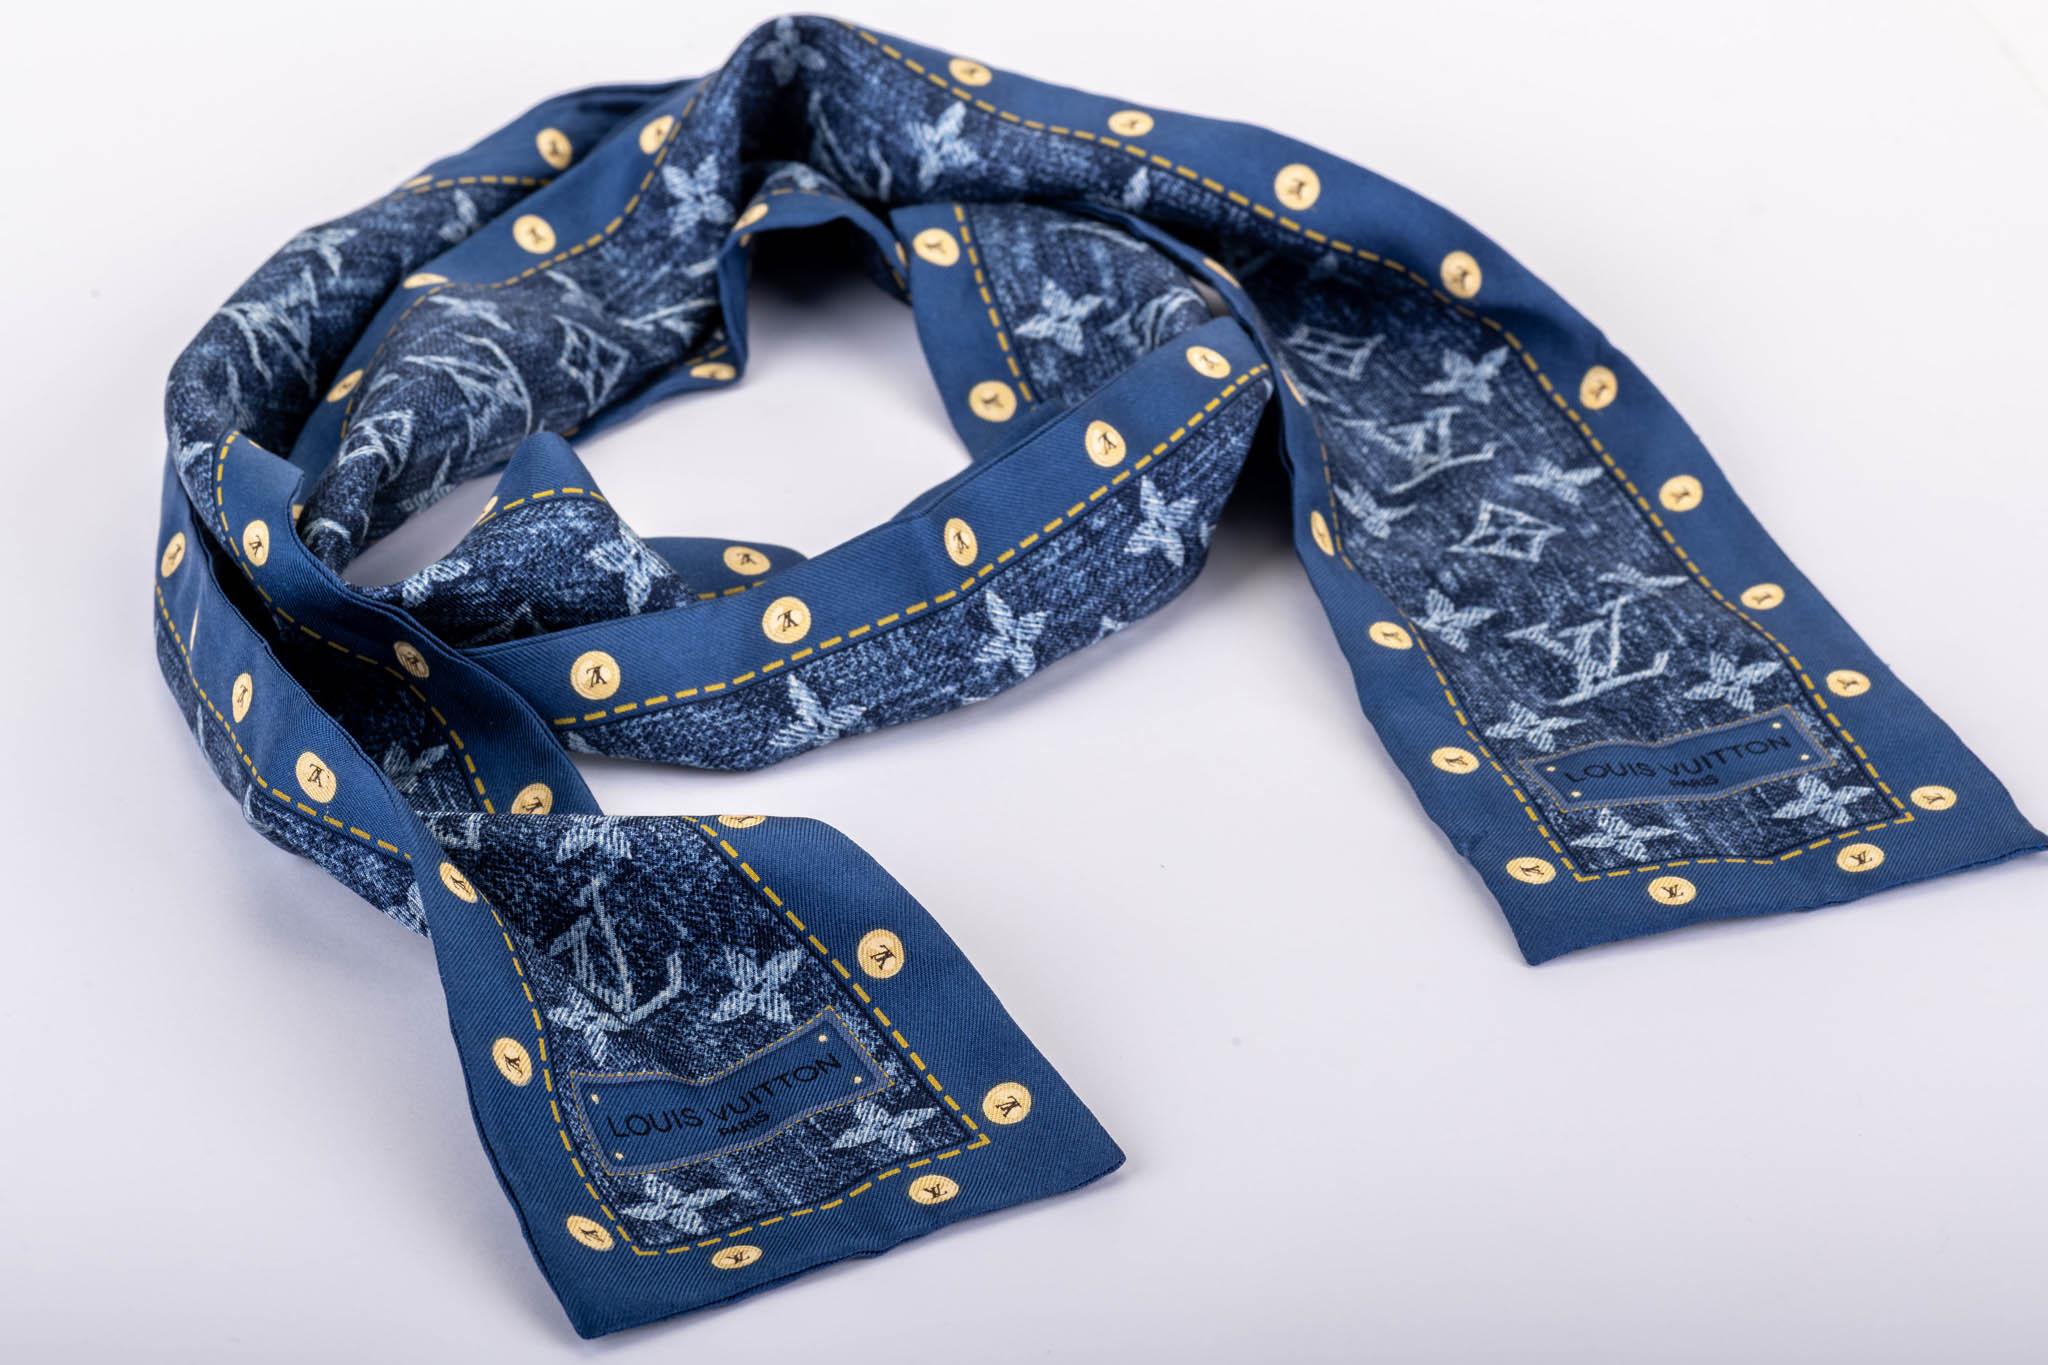 Louis Vuitton limited edition denim large twilly scarf. Excellent condition. Comes with original box.